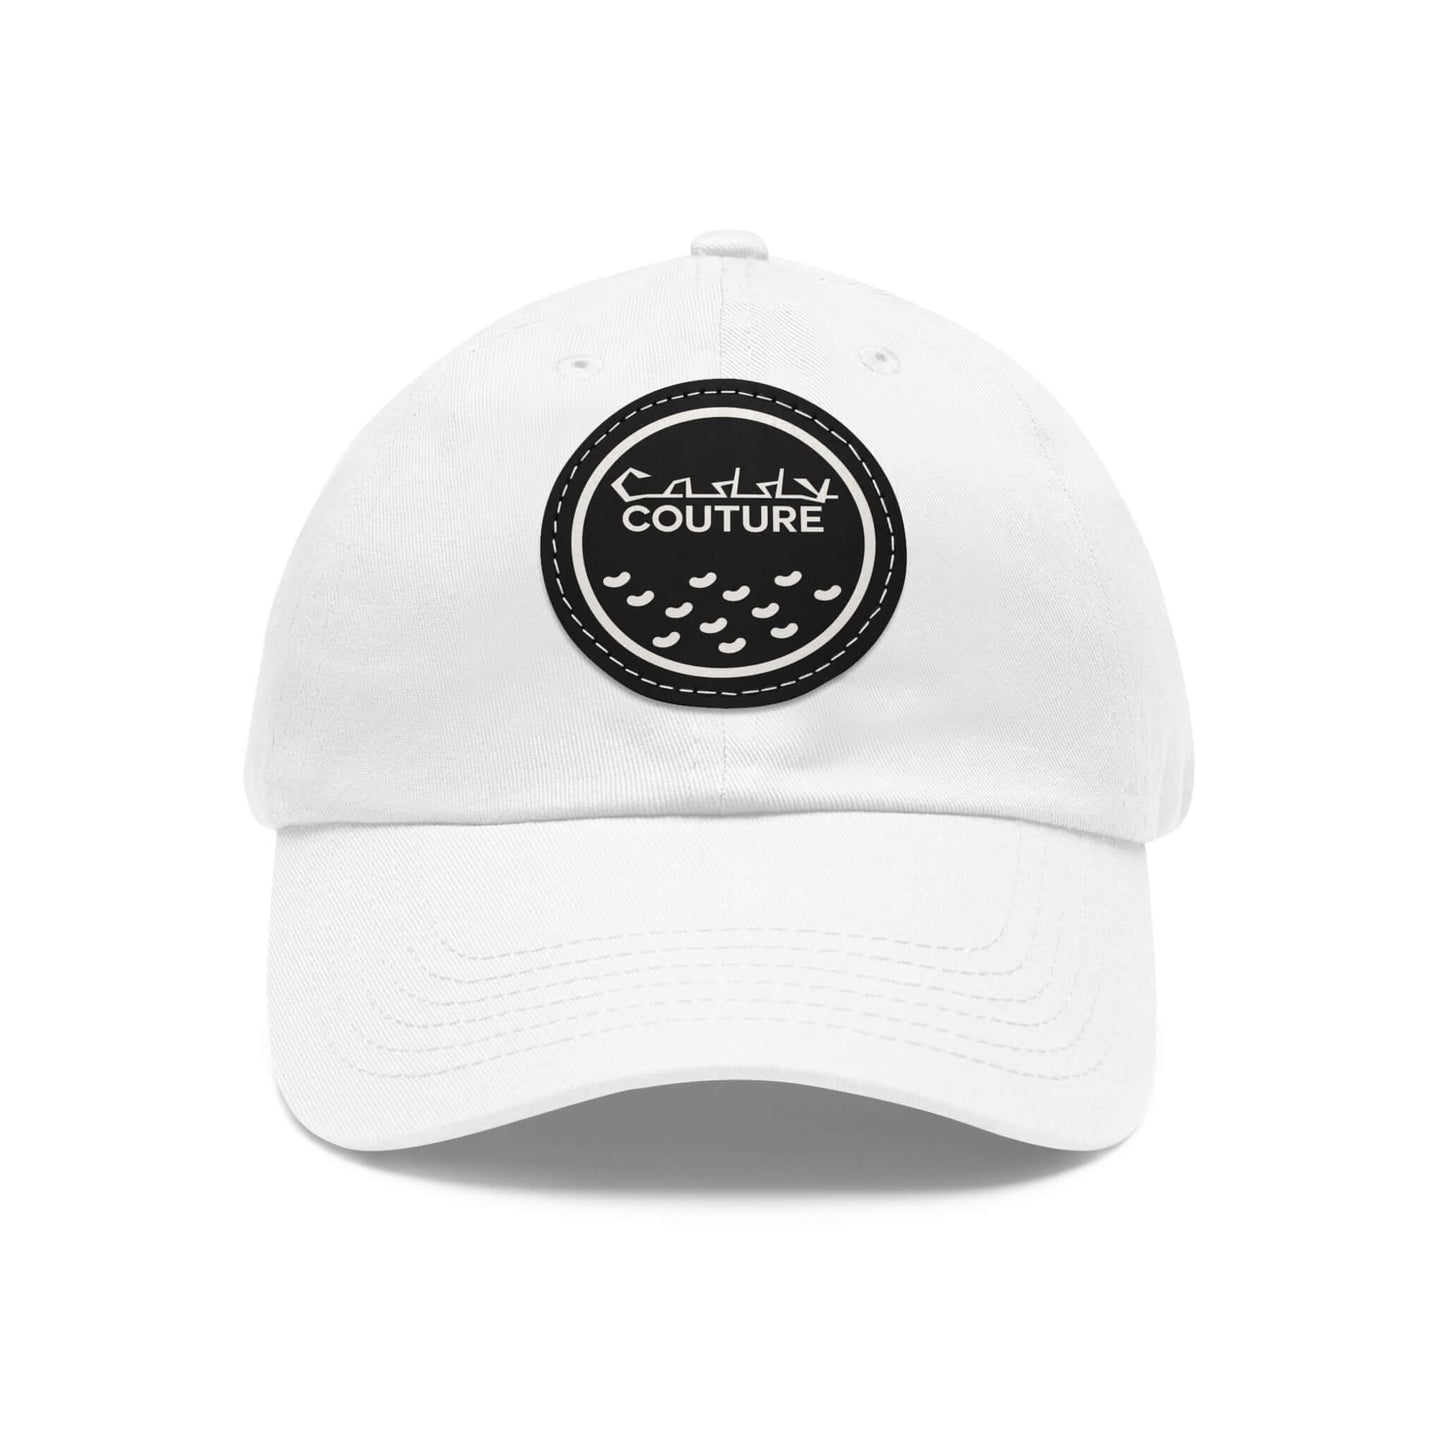 Caddy Couture Dad Hat with Leather Patch